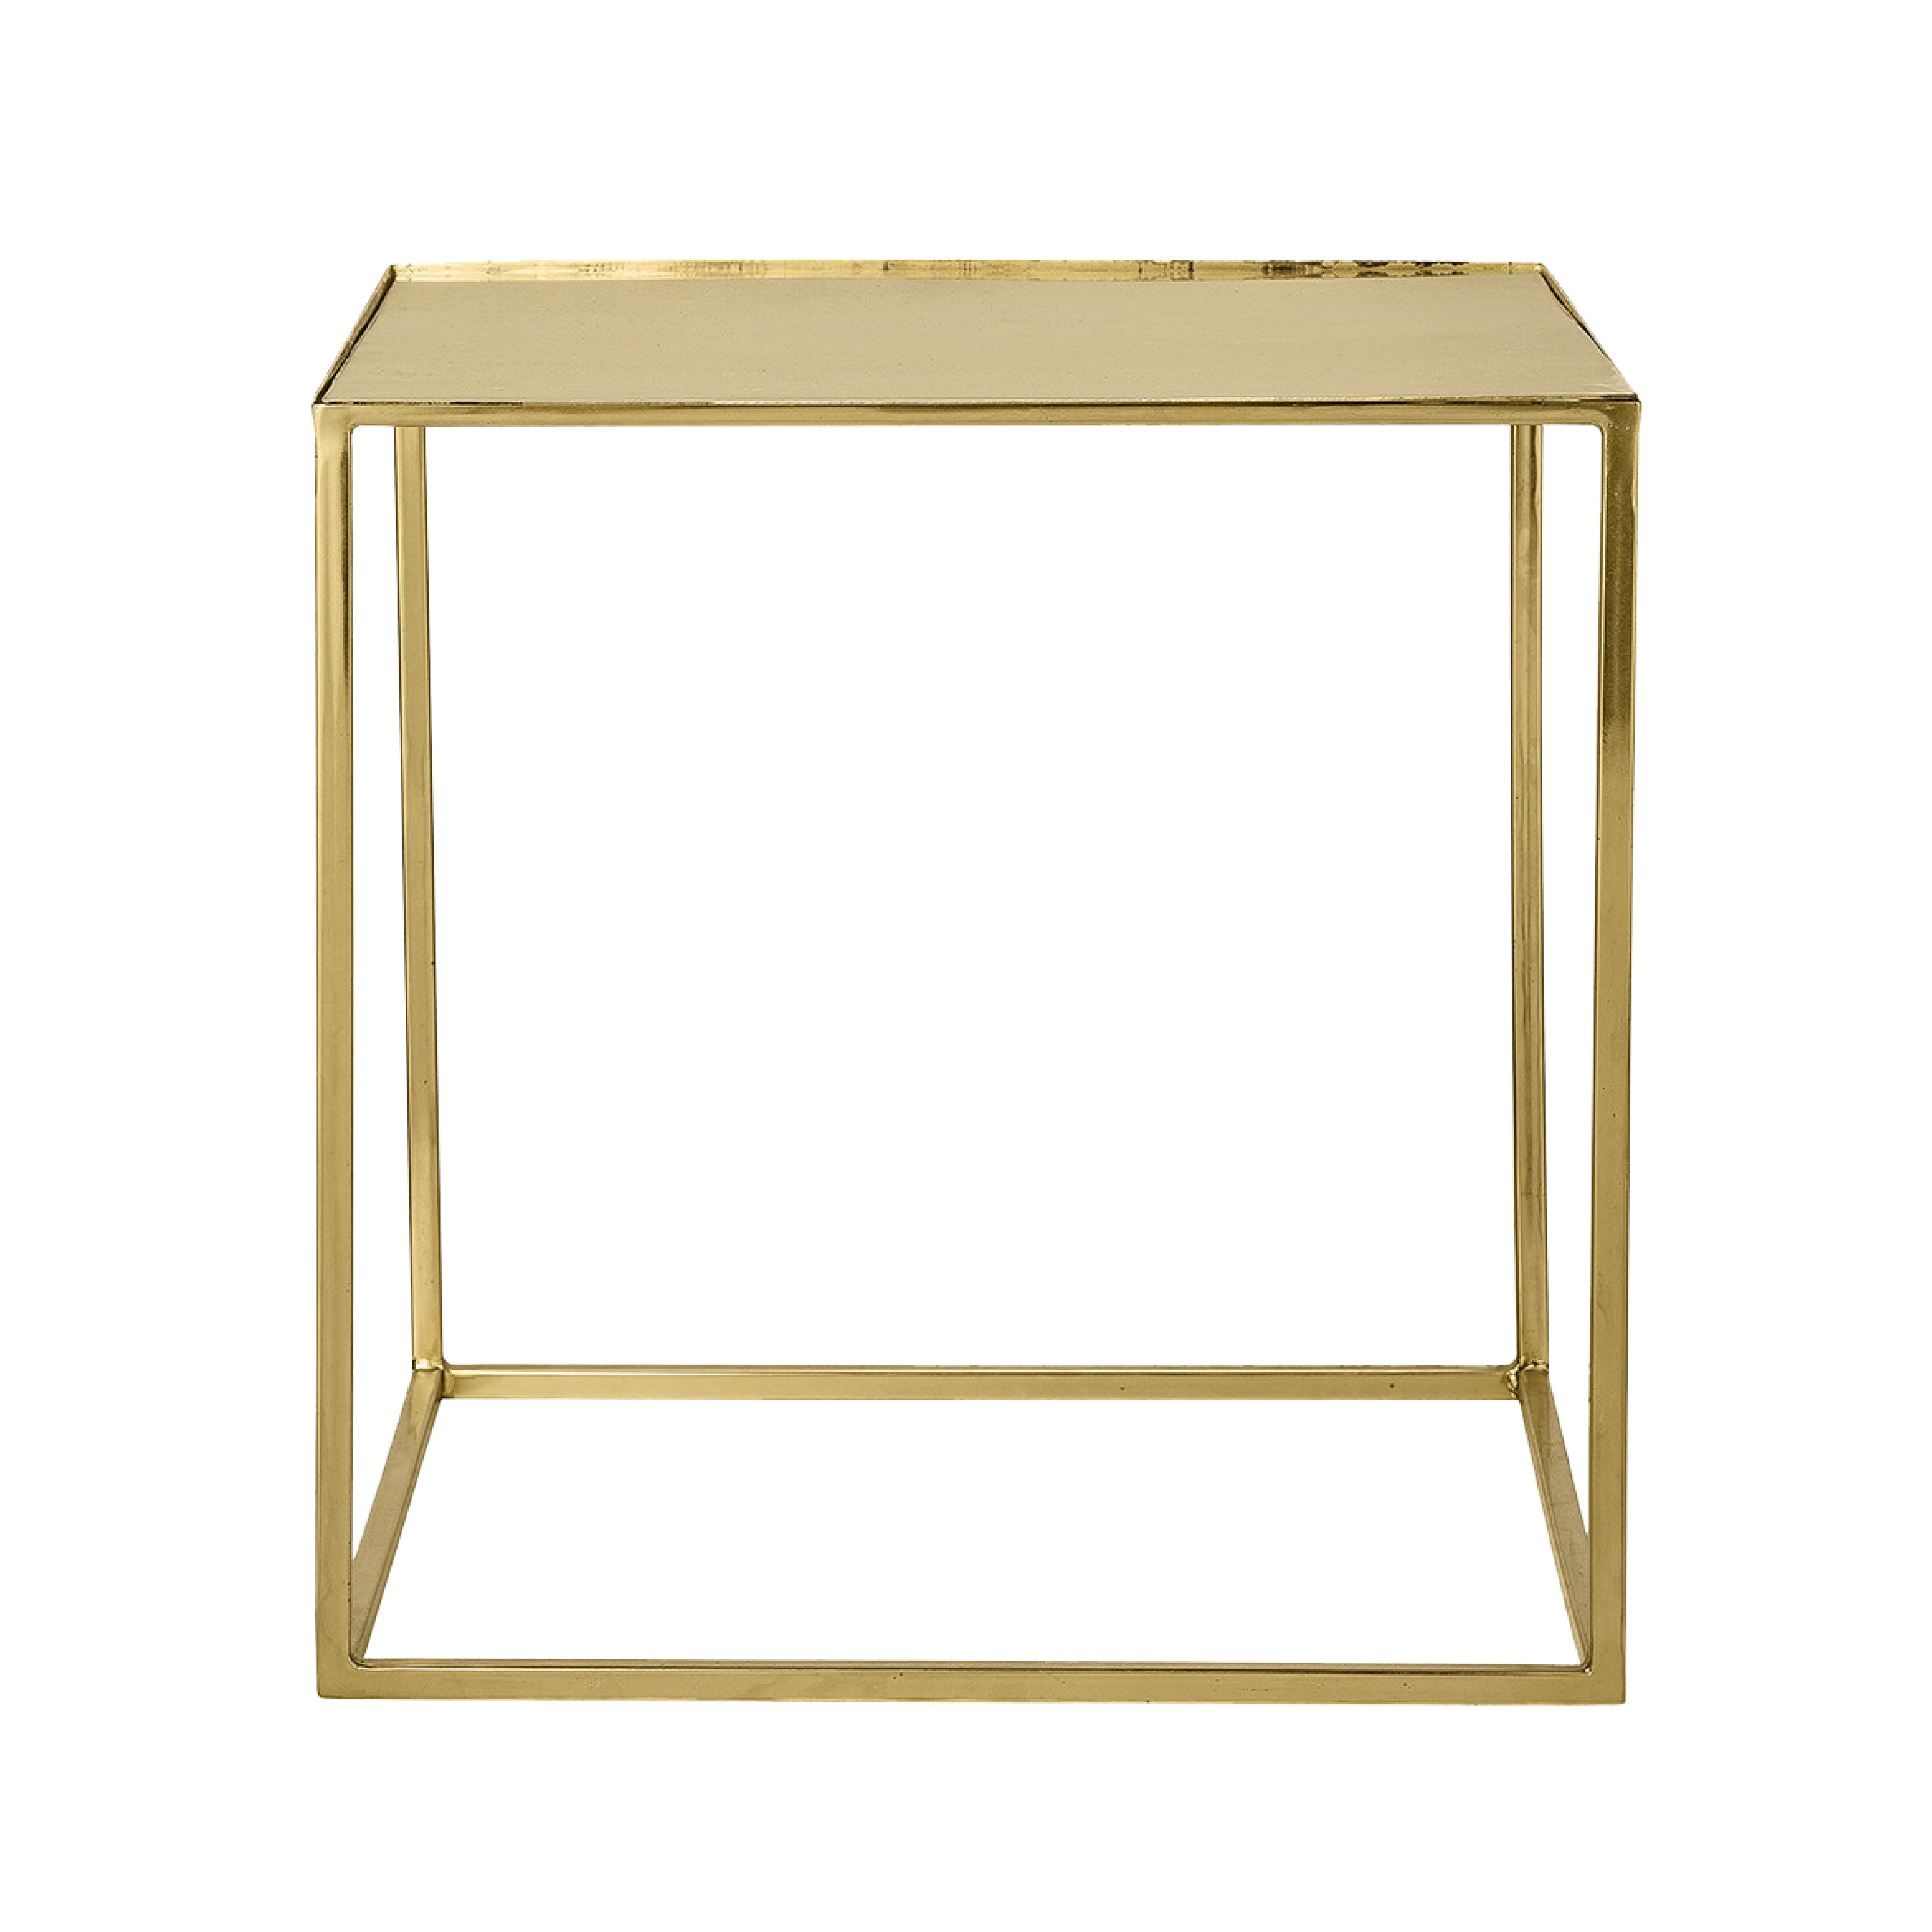 Cube side table in gold